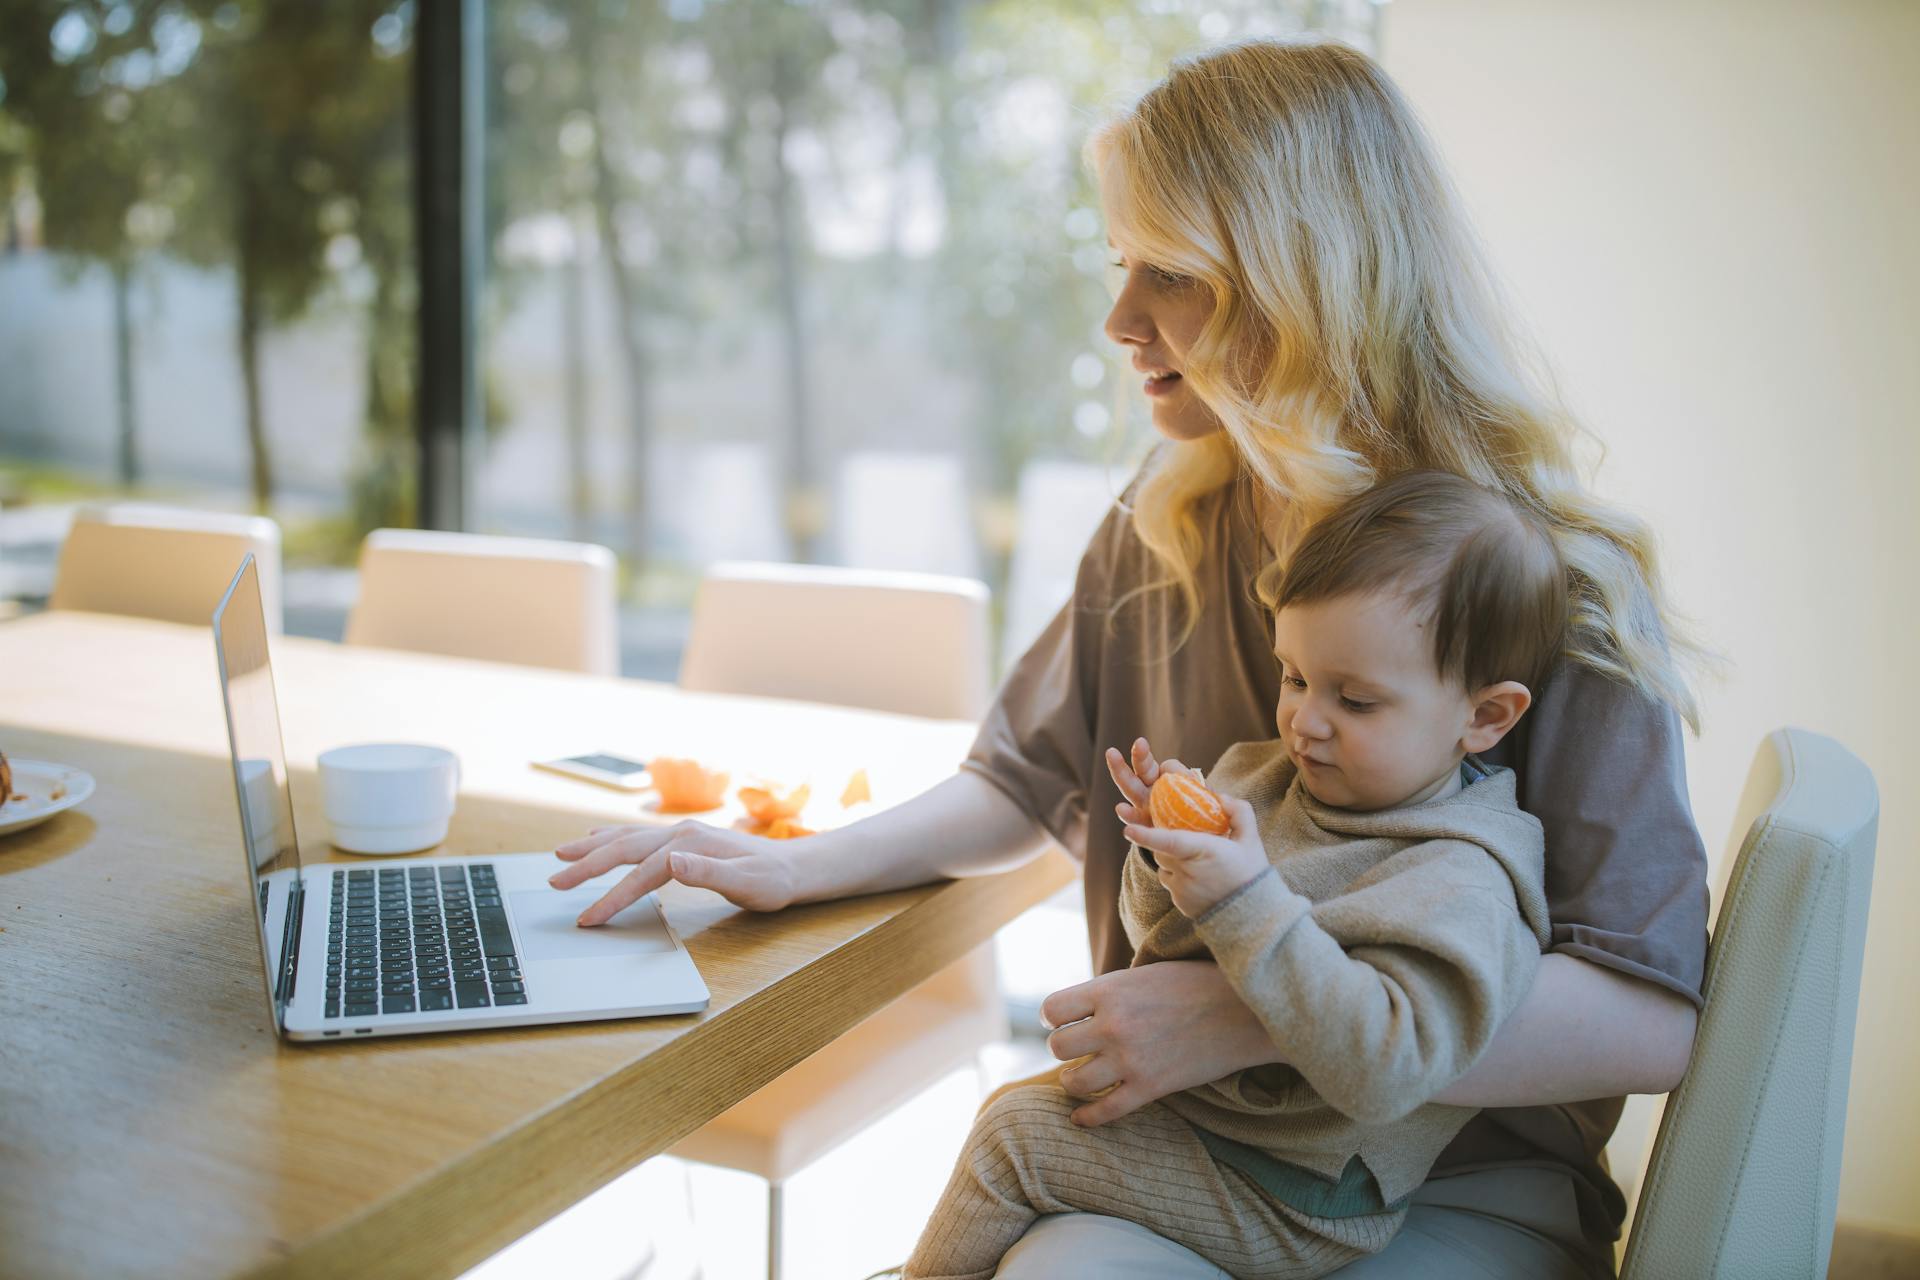 A woman carrying her son while using a laptop | Source: Pexels